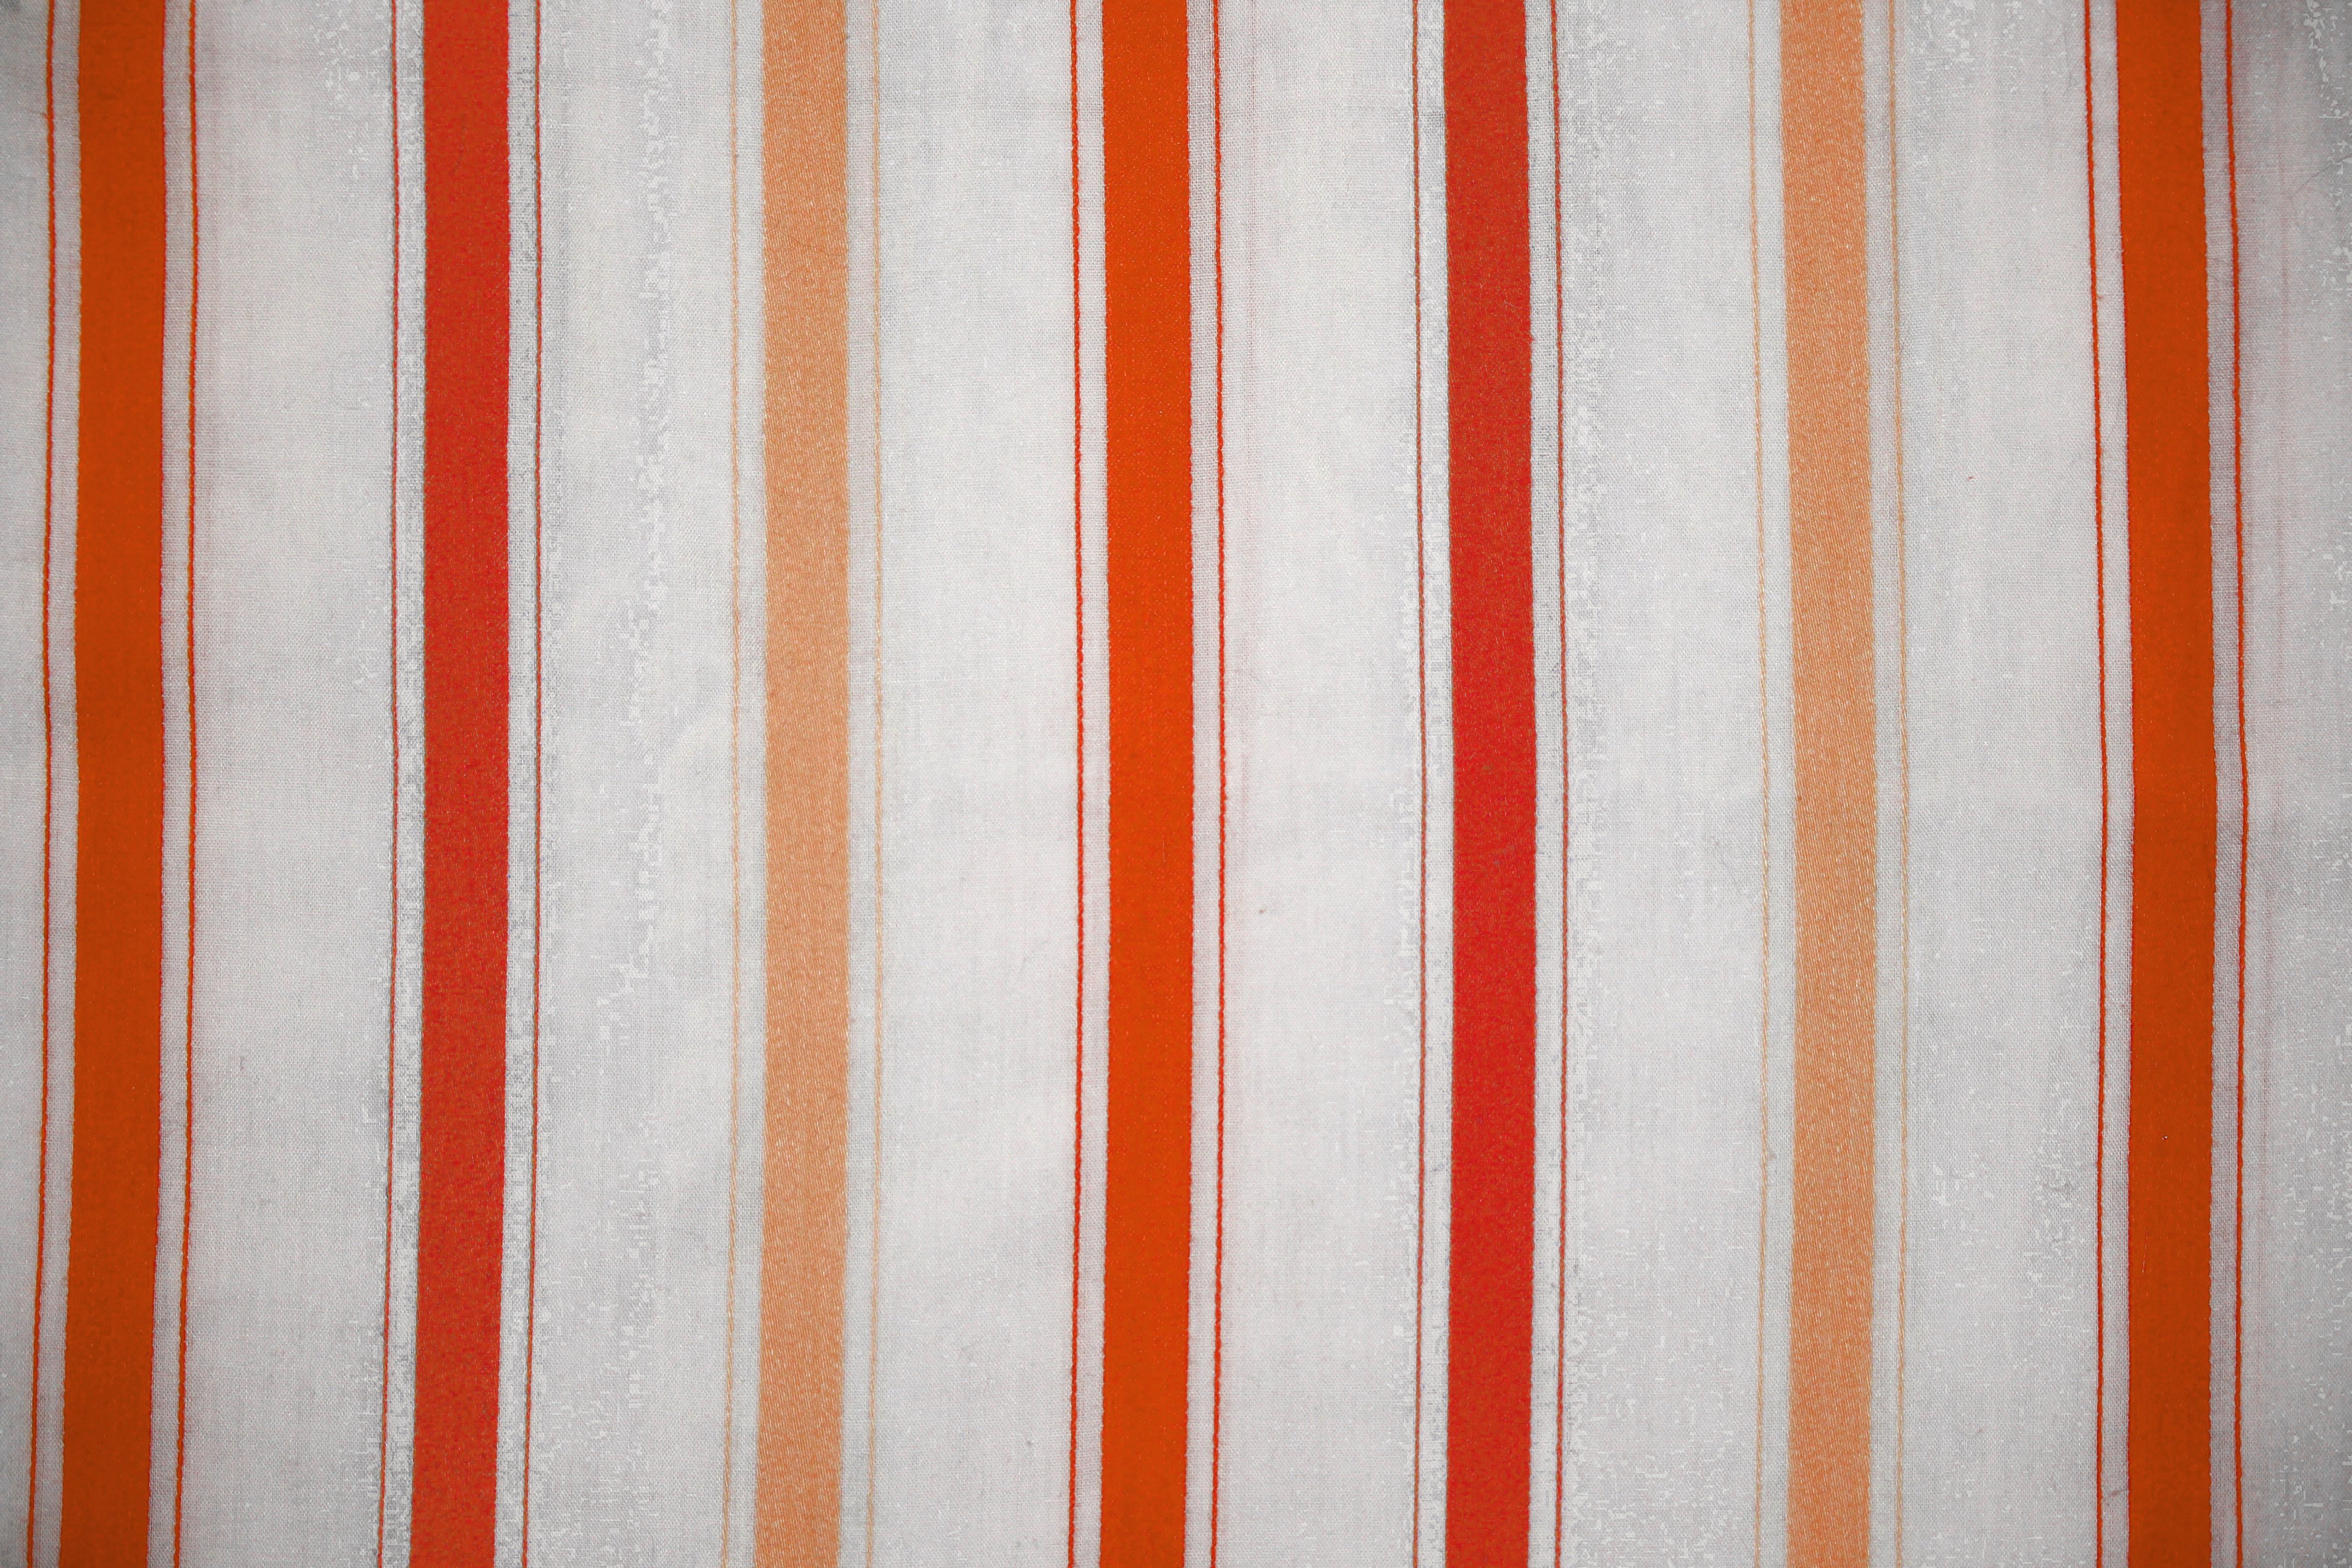 Striped Fabric Texture Orange on White Picture | Free Photograph ...